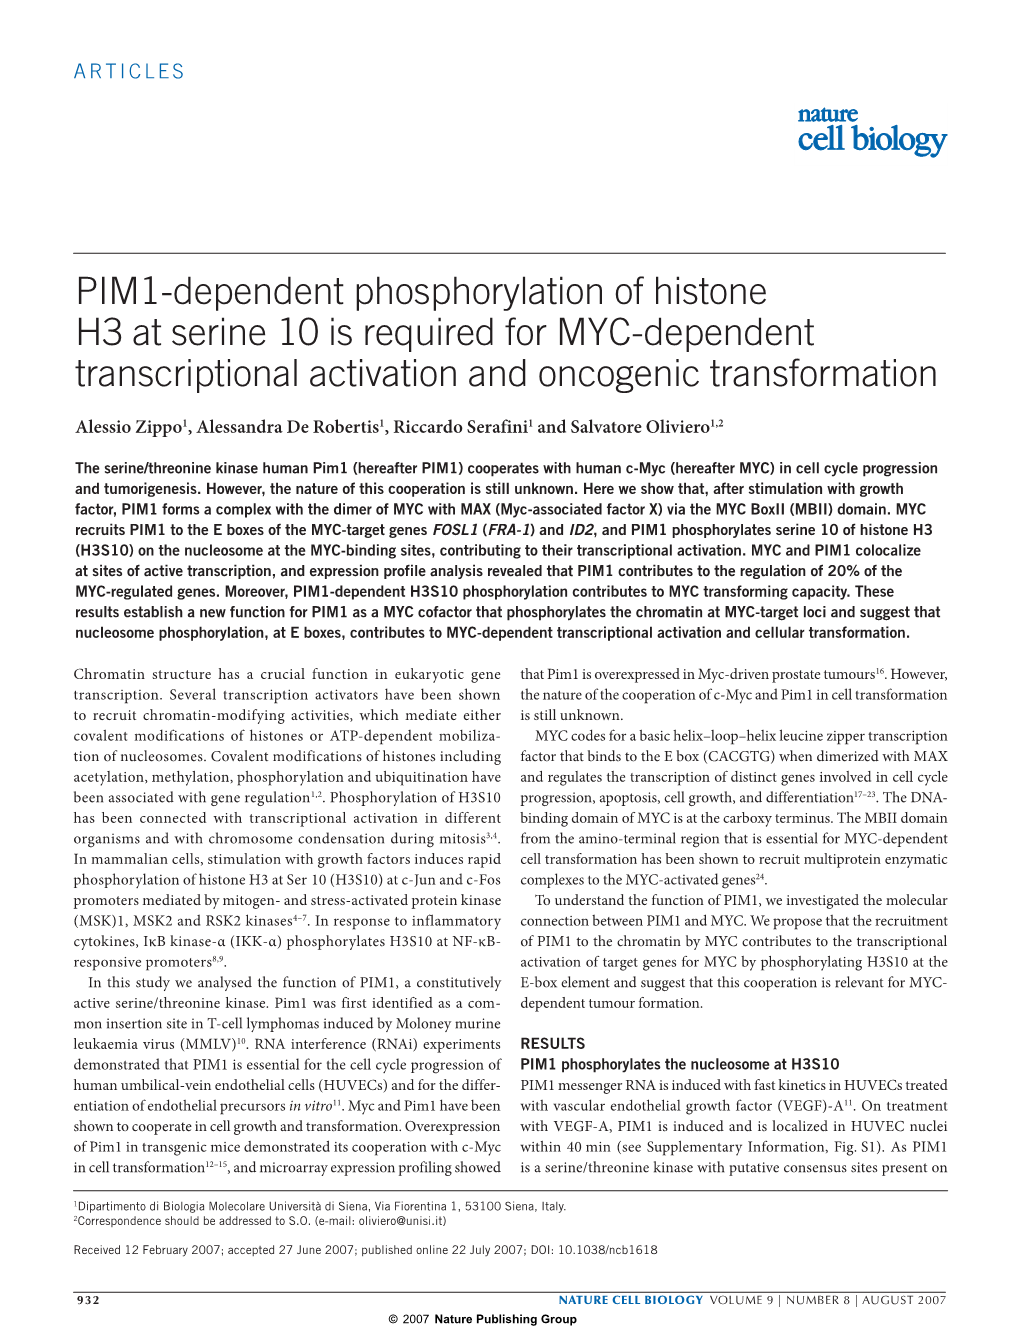 PIM1-Dependent Phosphorylation of Histone H3 at Serine 10 Is Required for MYC-Dependent Transcriptional Activation and Oncogenic Transformation